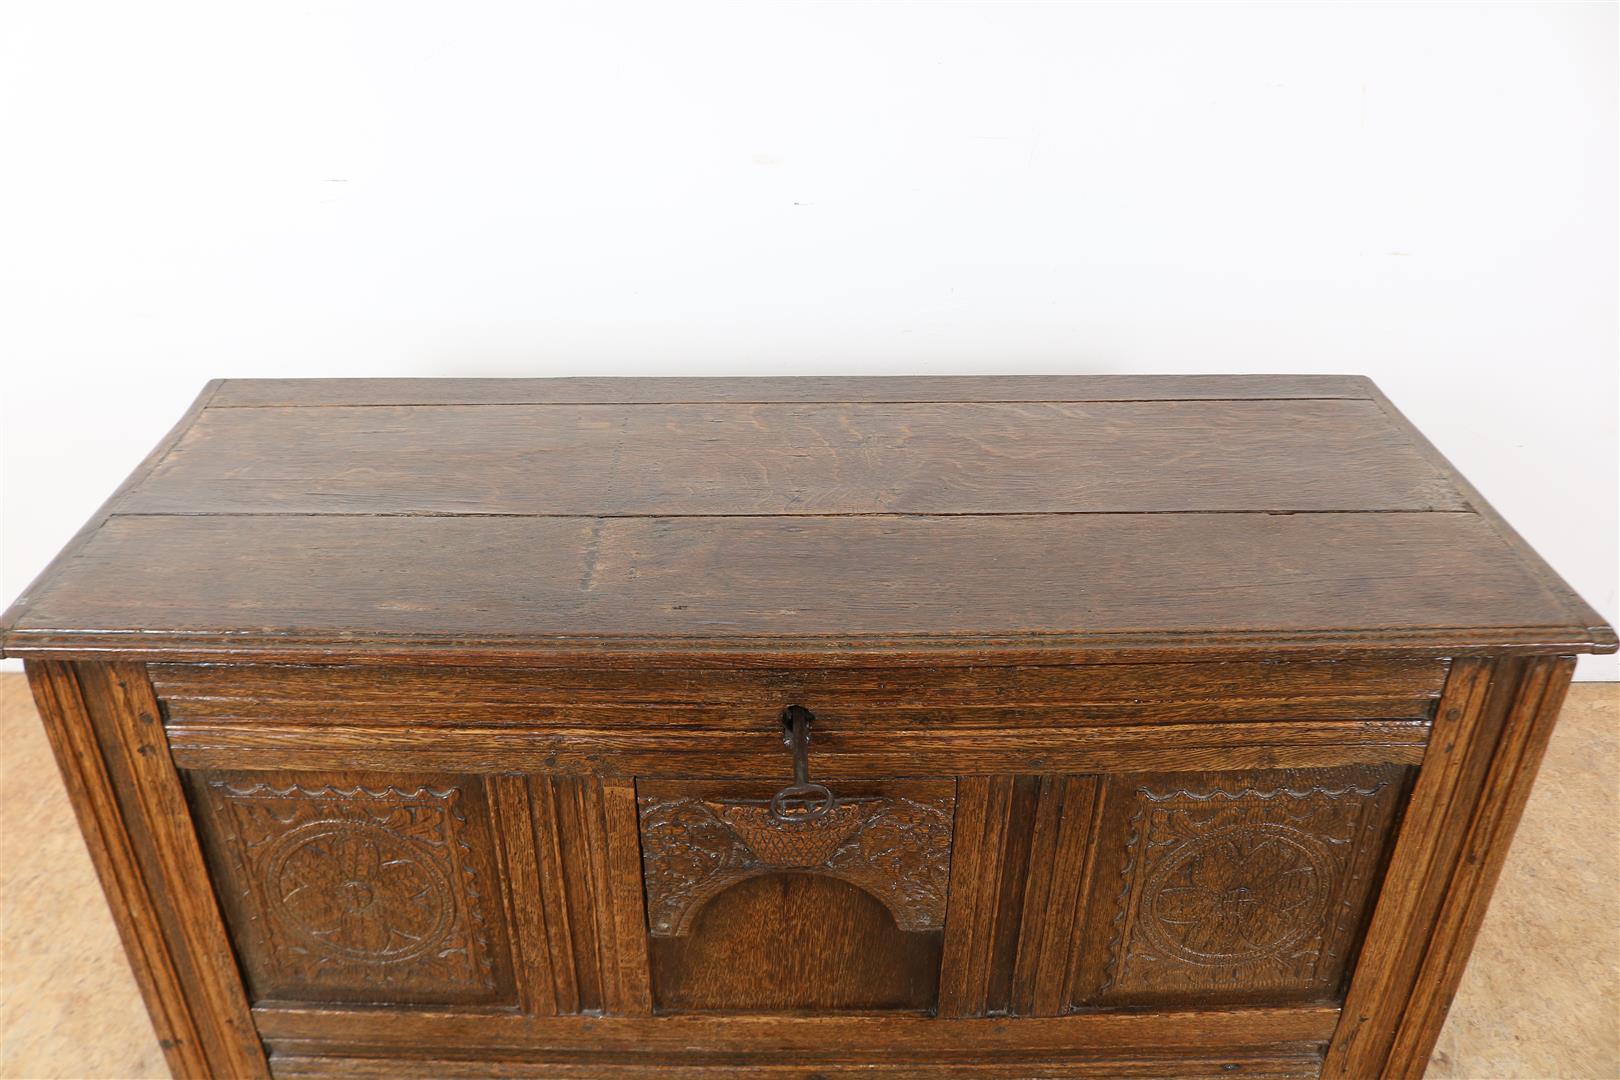 Oak blanket chest with 3 carved front panels with relief decor of a flower basket, iron hinges and - Image 3 of 5